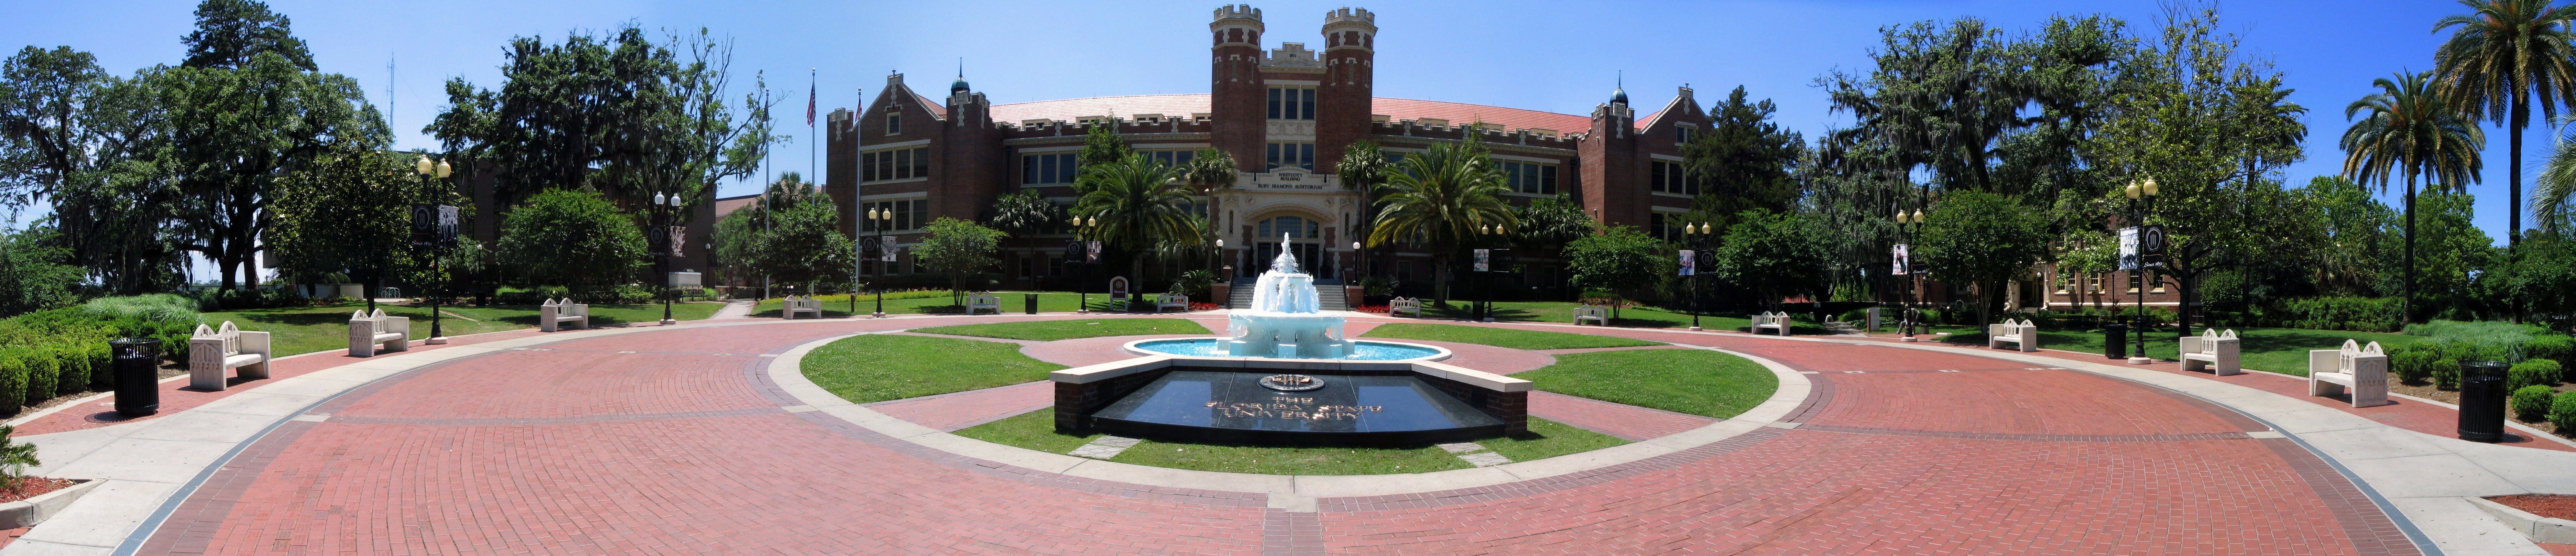 HD Quality Wallpaper | Collection: Man Made, 7964x1719 Florida State University